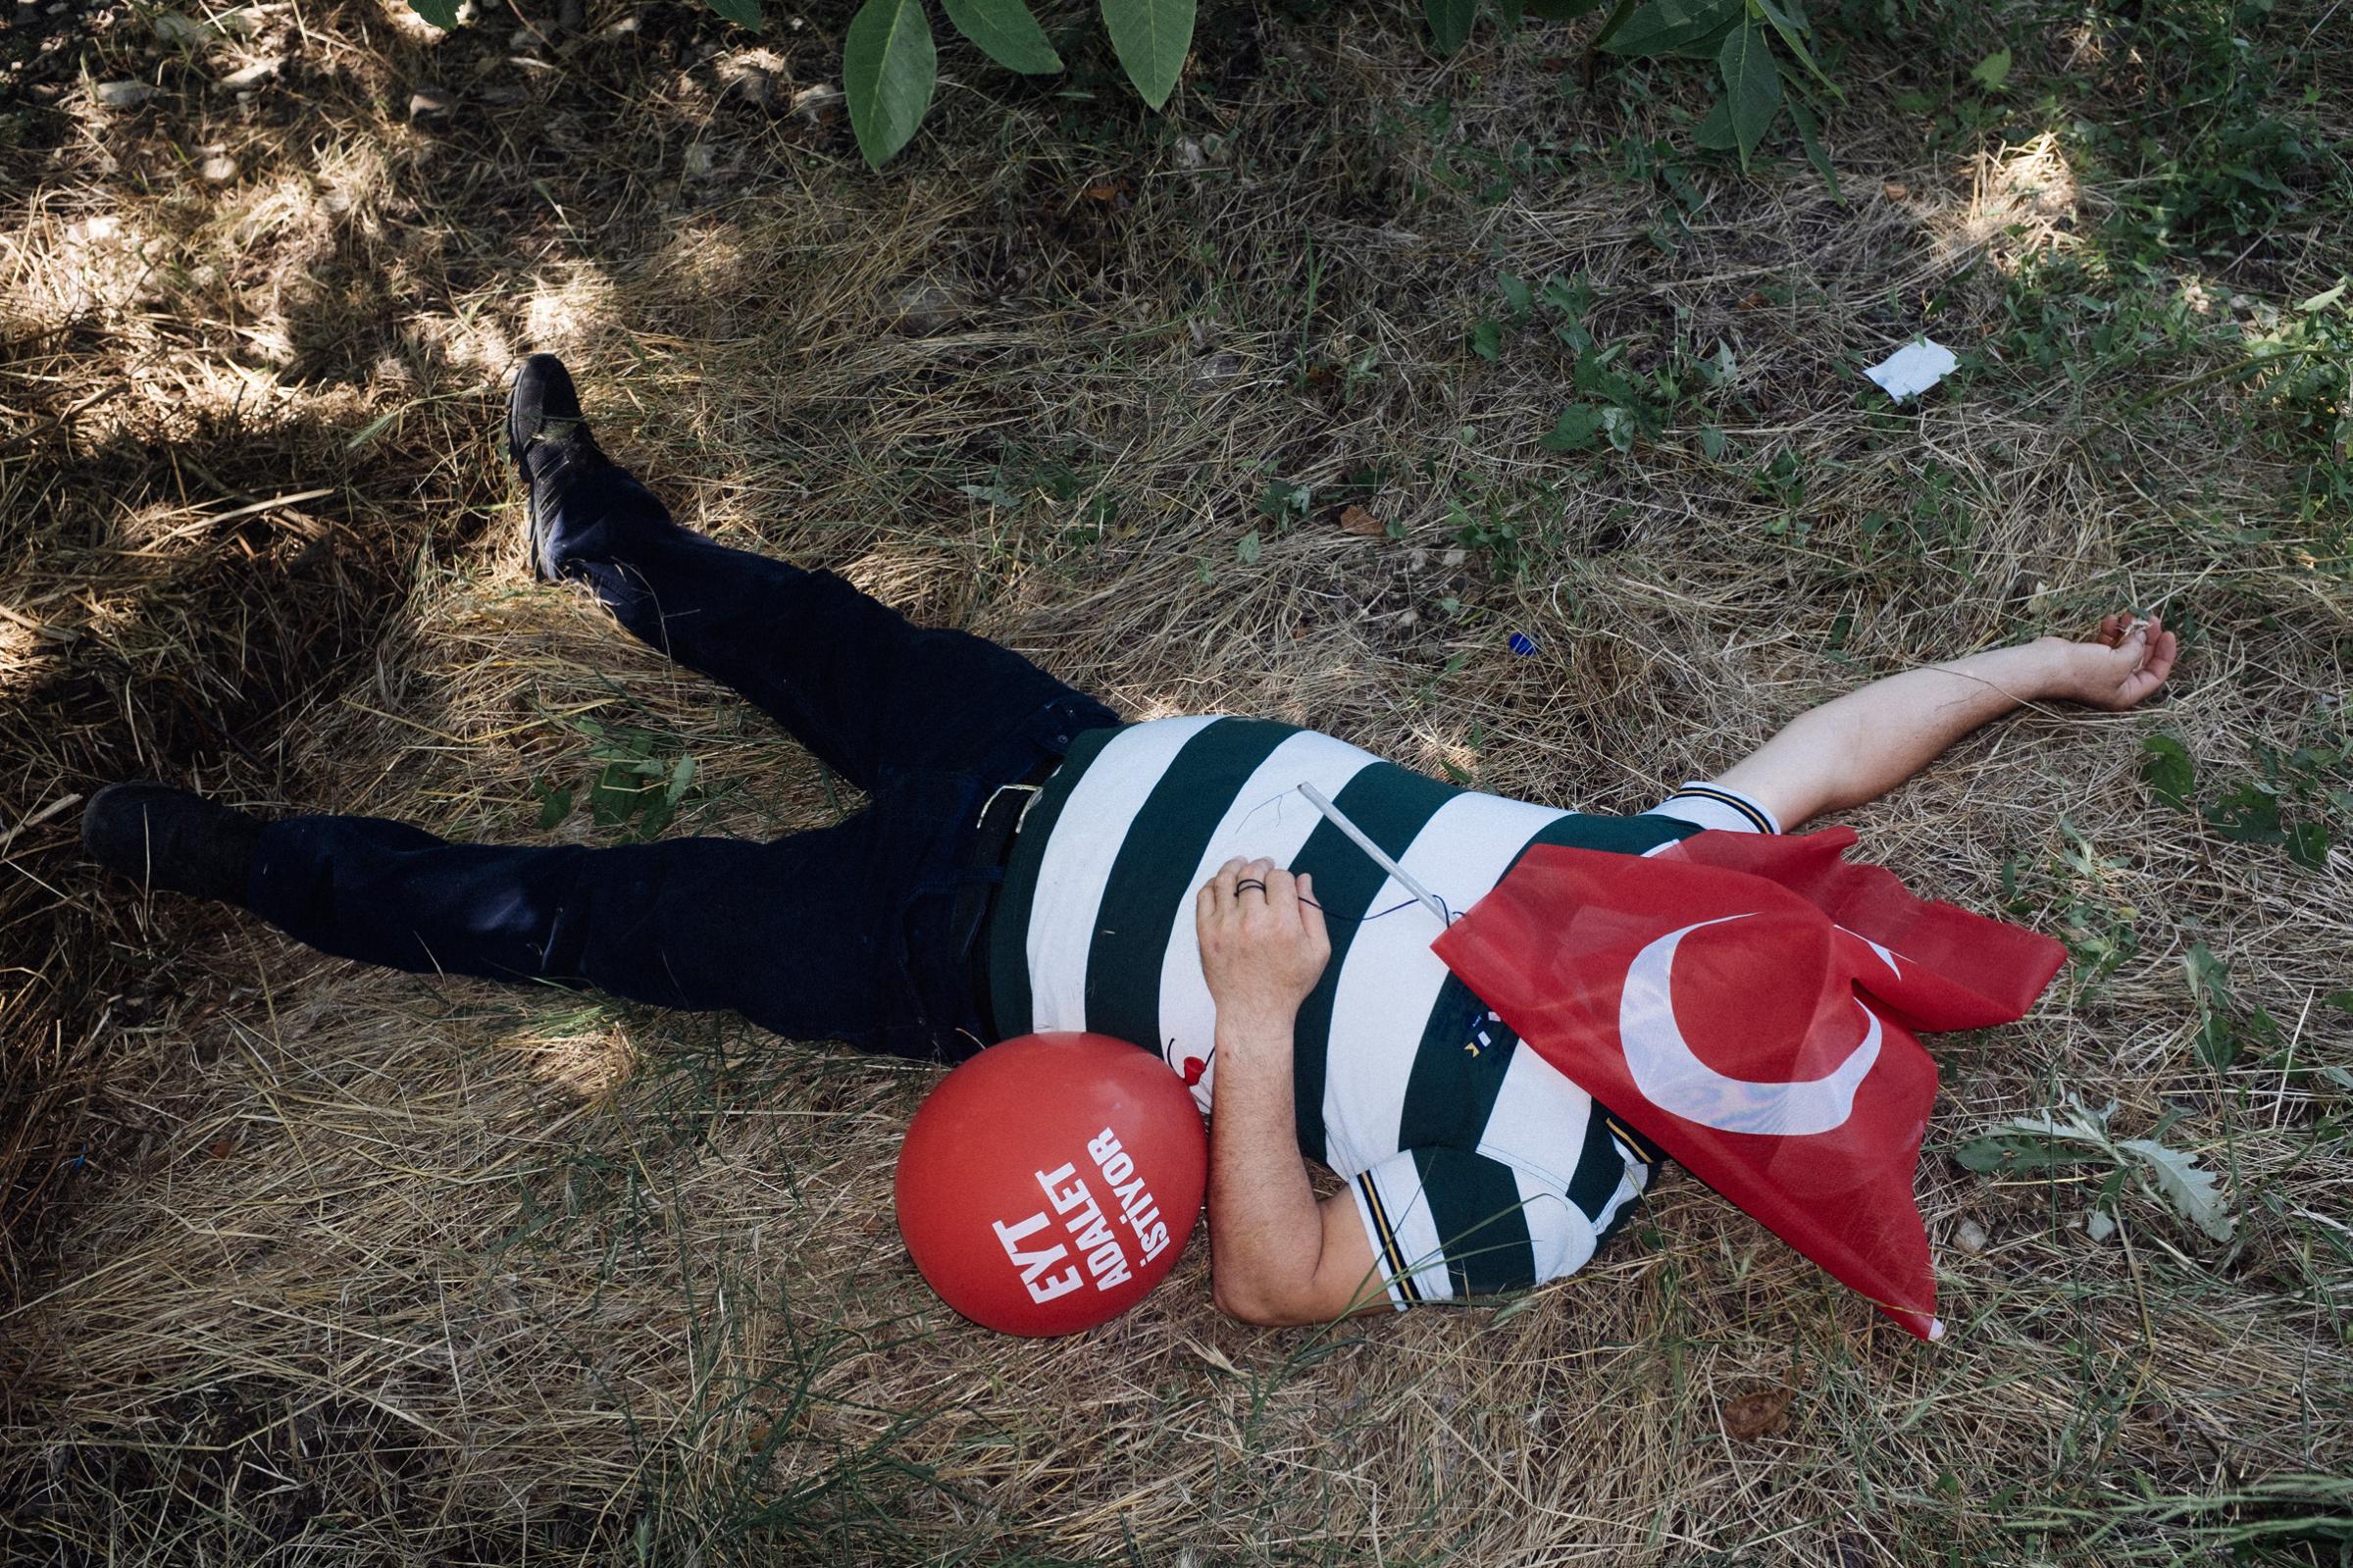 TURKEY, Sakarya, A man sleeps with a Turkish flag on his face, on the field during break time at Justice March. Since last week, Turkey has been suffering one of the most intense heat waves in a century. In this hear, the thousands of people are taking part in shifts in the “justice march” of main opposition Republican People’s Party (CHP) leader Kemal Kilicdaroglu. They are struggling under the burning sun over their head and also the melting asphalt under their feet. 2017